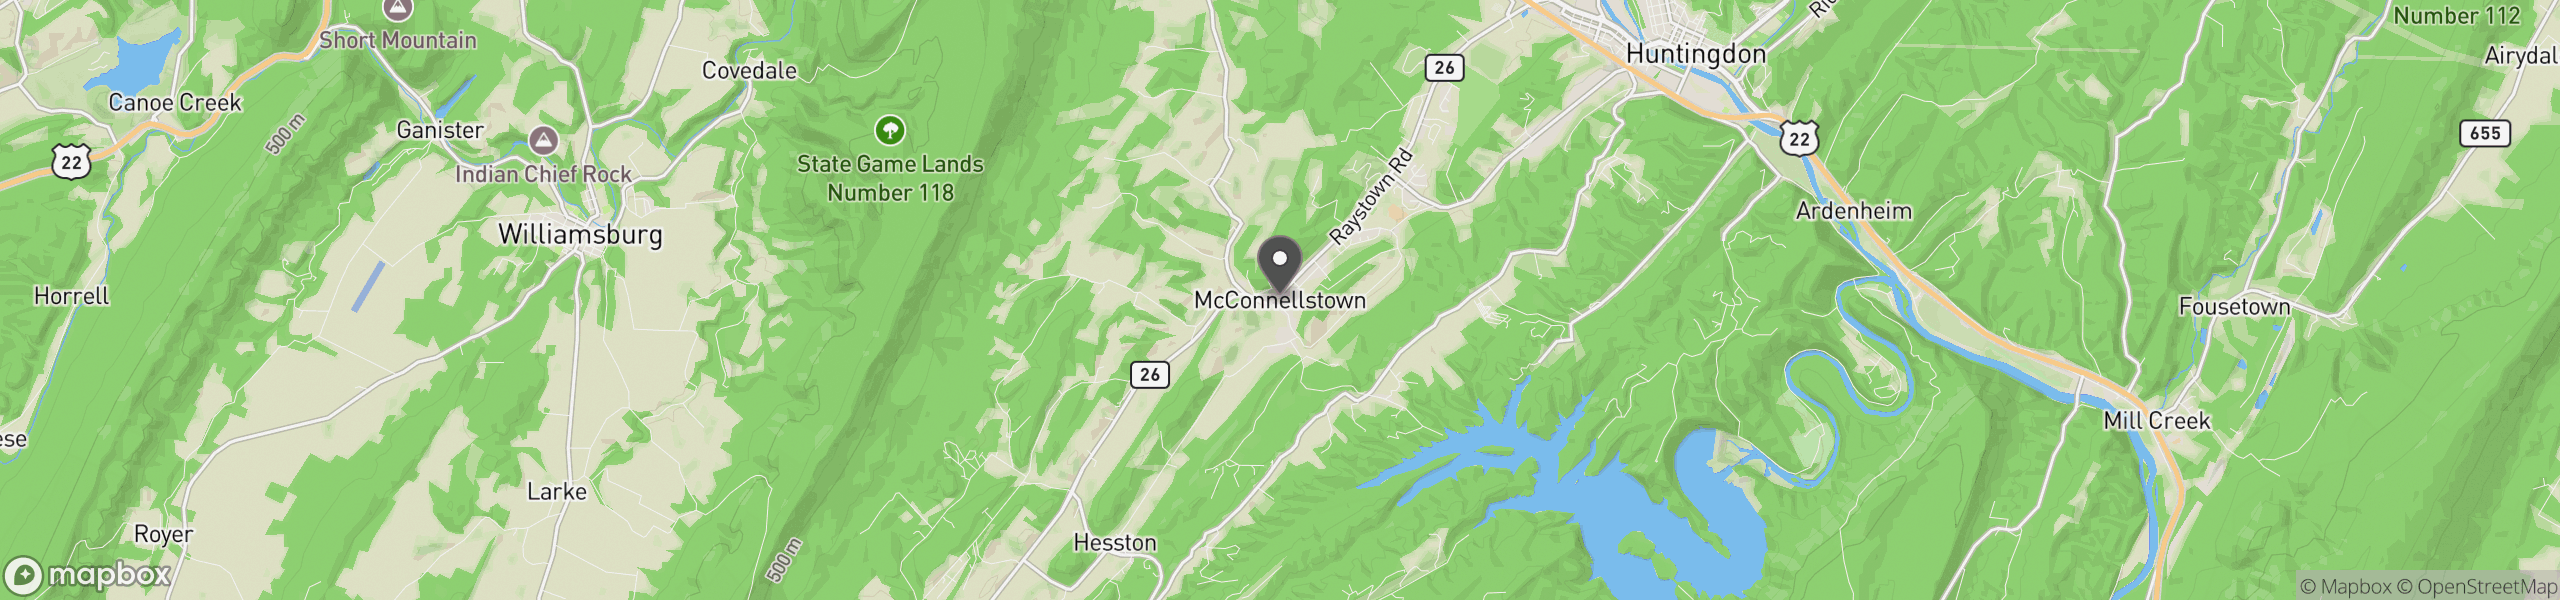 Mcconnellstown, PA 16660